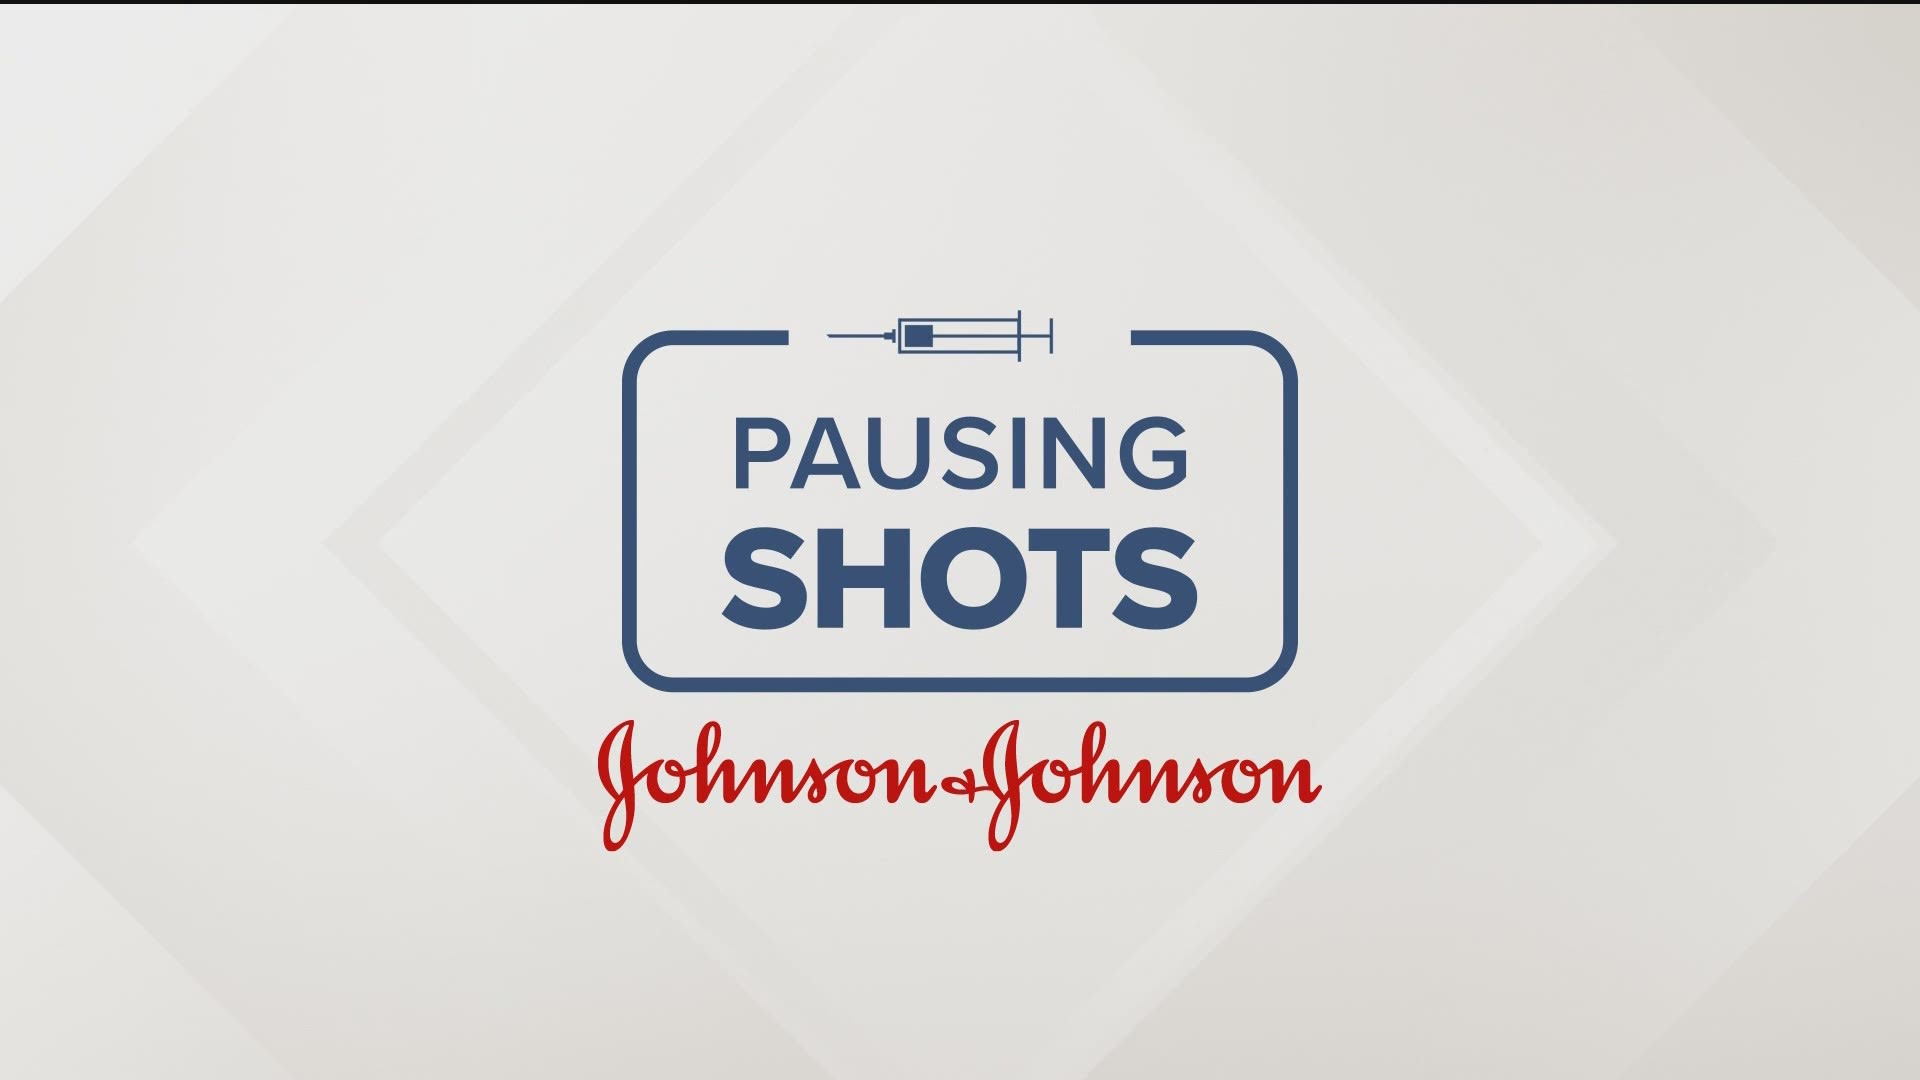 Many wonder how the J&J pause may impact vaccine roll-out for vulnerable populations in San Diego such as homebound seniors and people experiencing homelessness.